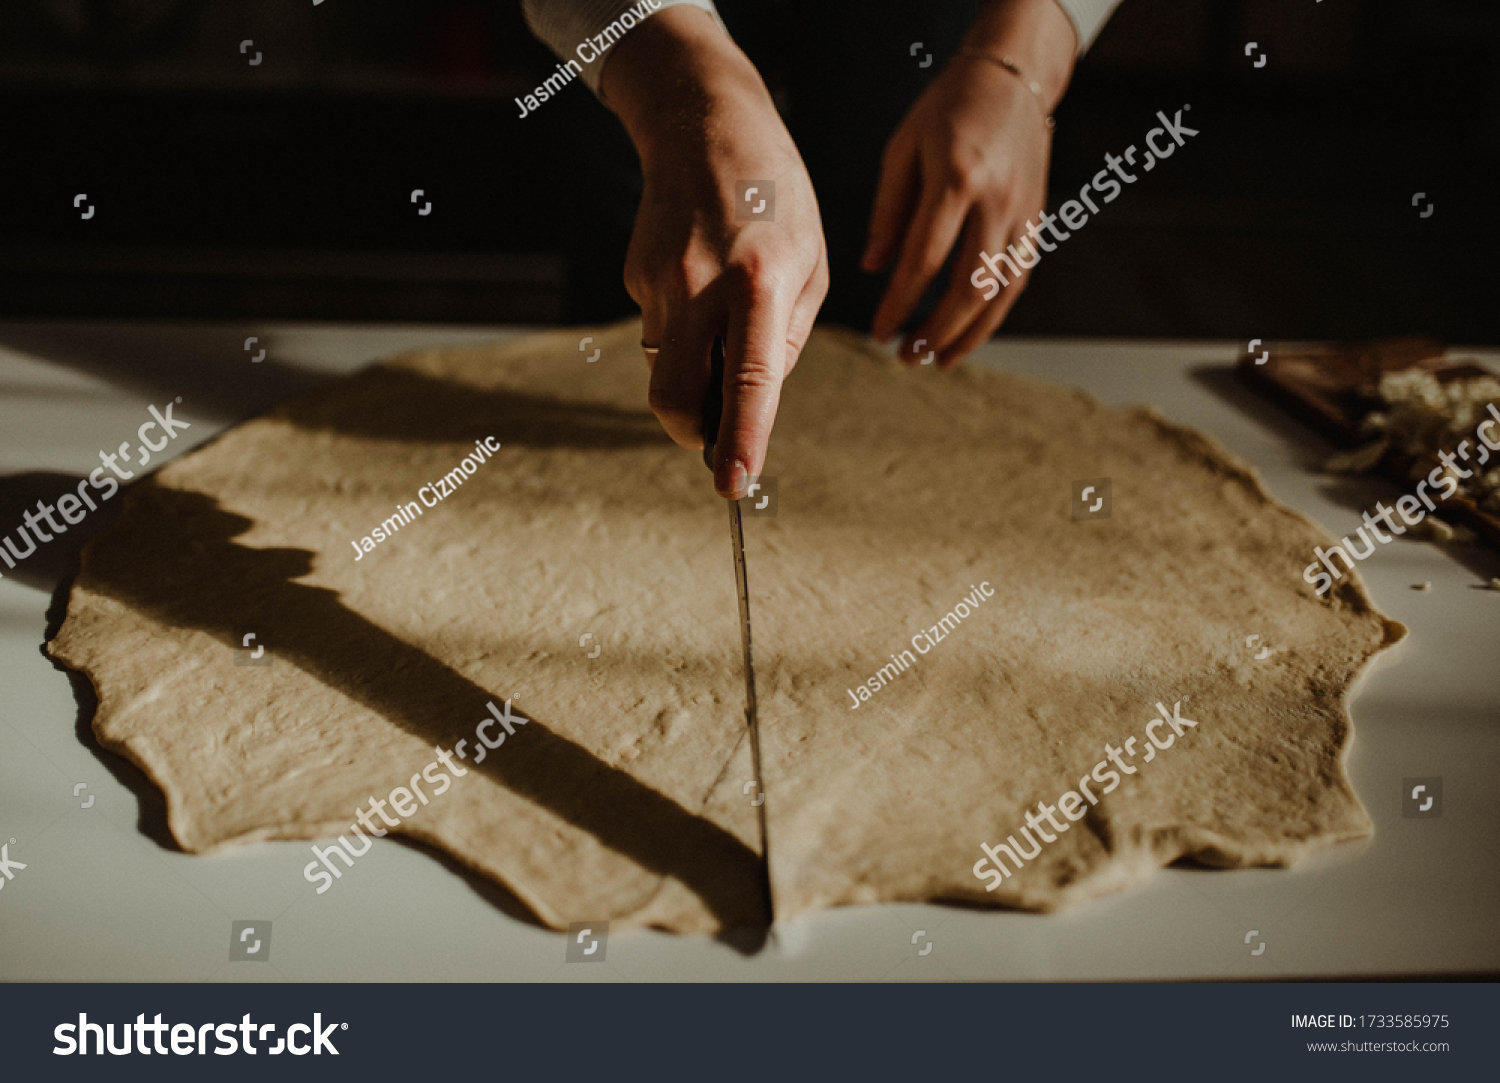 Wife making a homemade doughy pastry food with smoked cheese during Ramadan for dinner during the sunset light in the home on the wooden table #1733585975